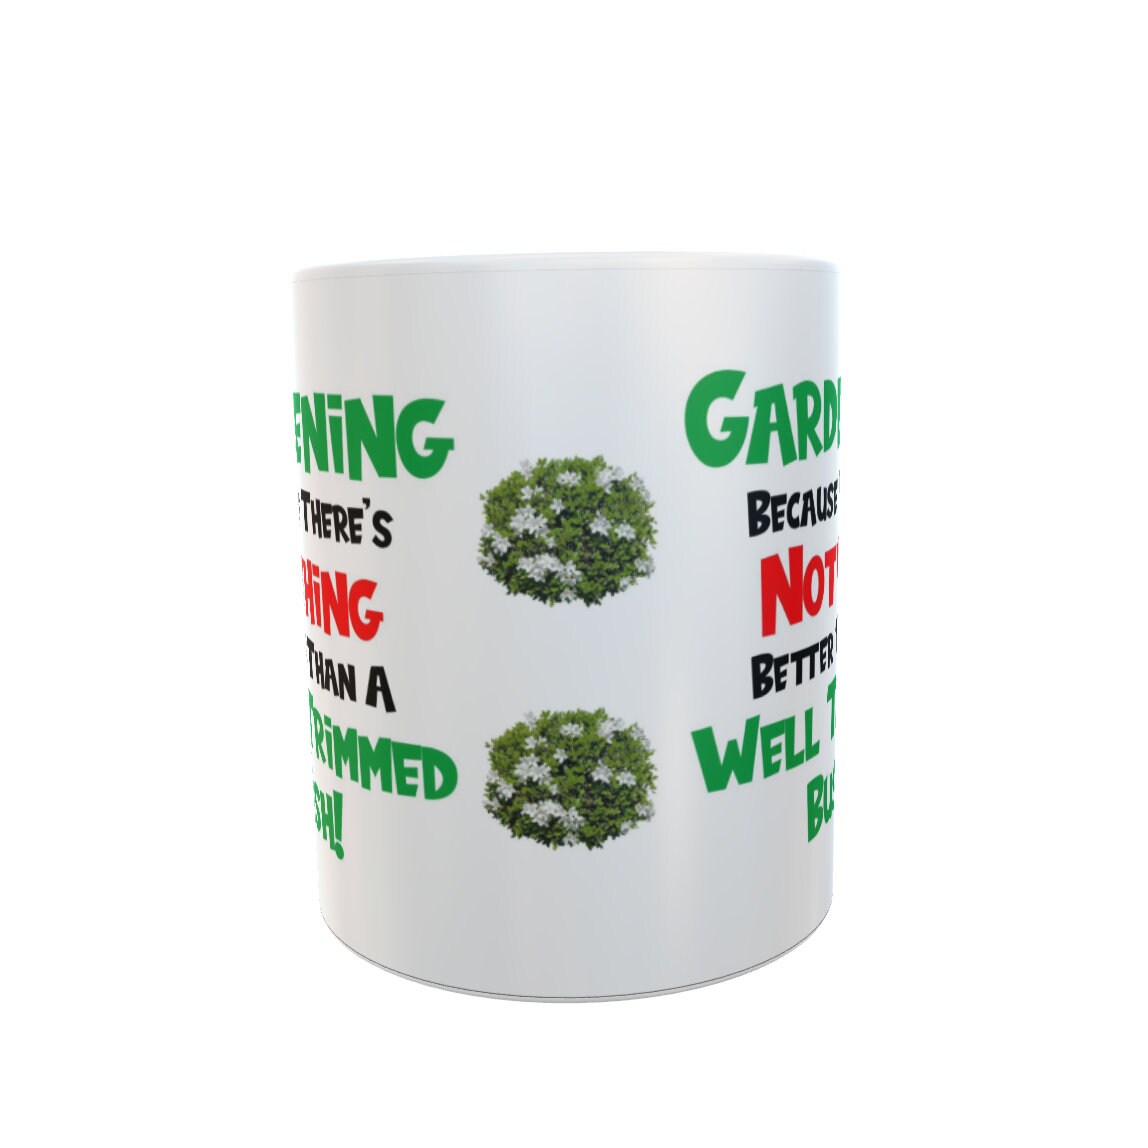 Gardening Mug Gift - Nothing Better Than A Well Trimmed Bush - Cute Funny Novelty Rude Garden Cup Present